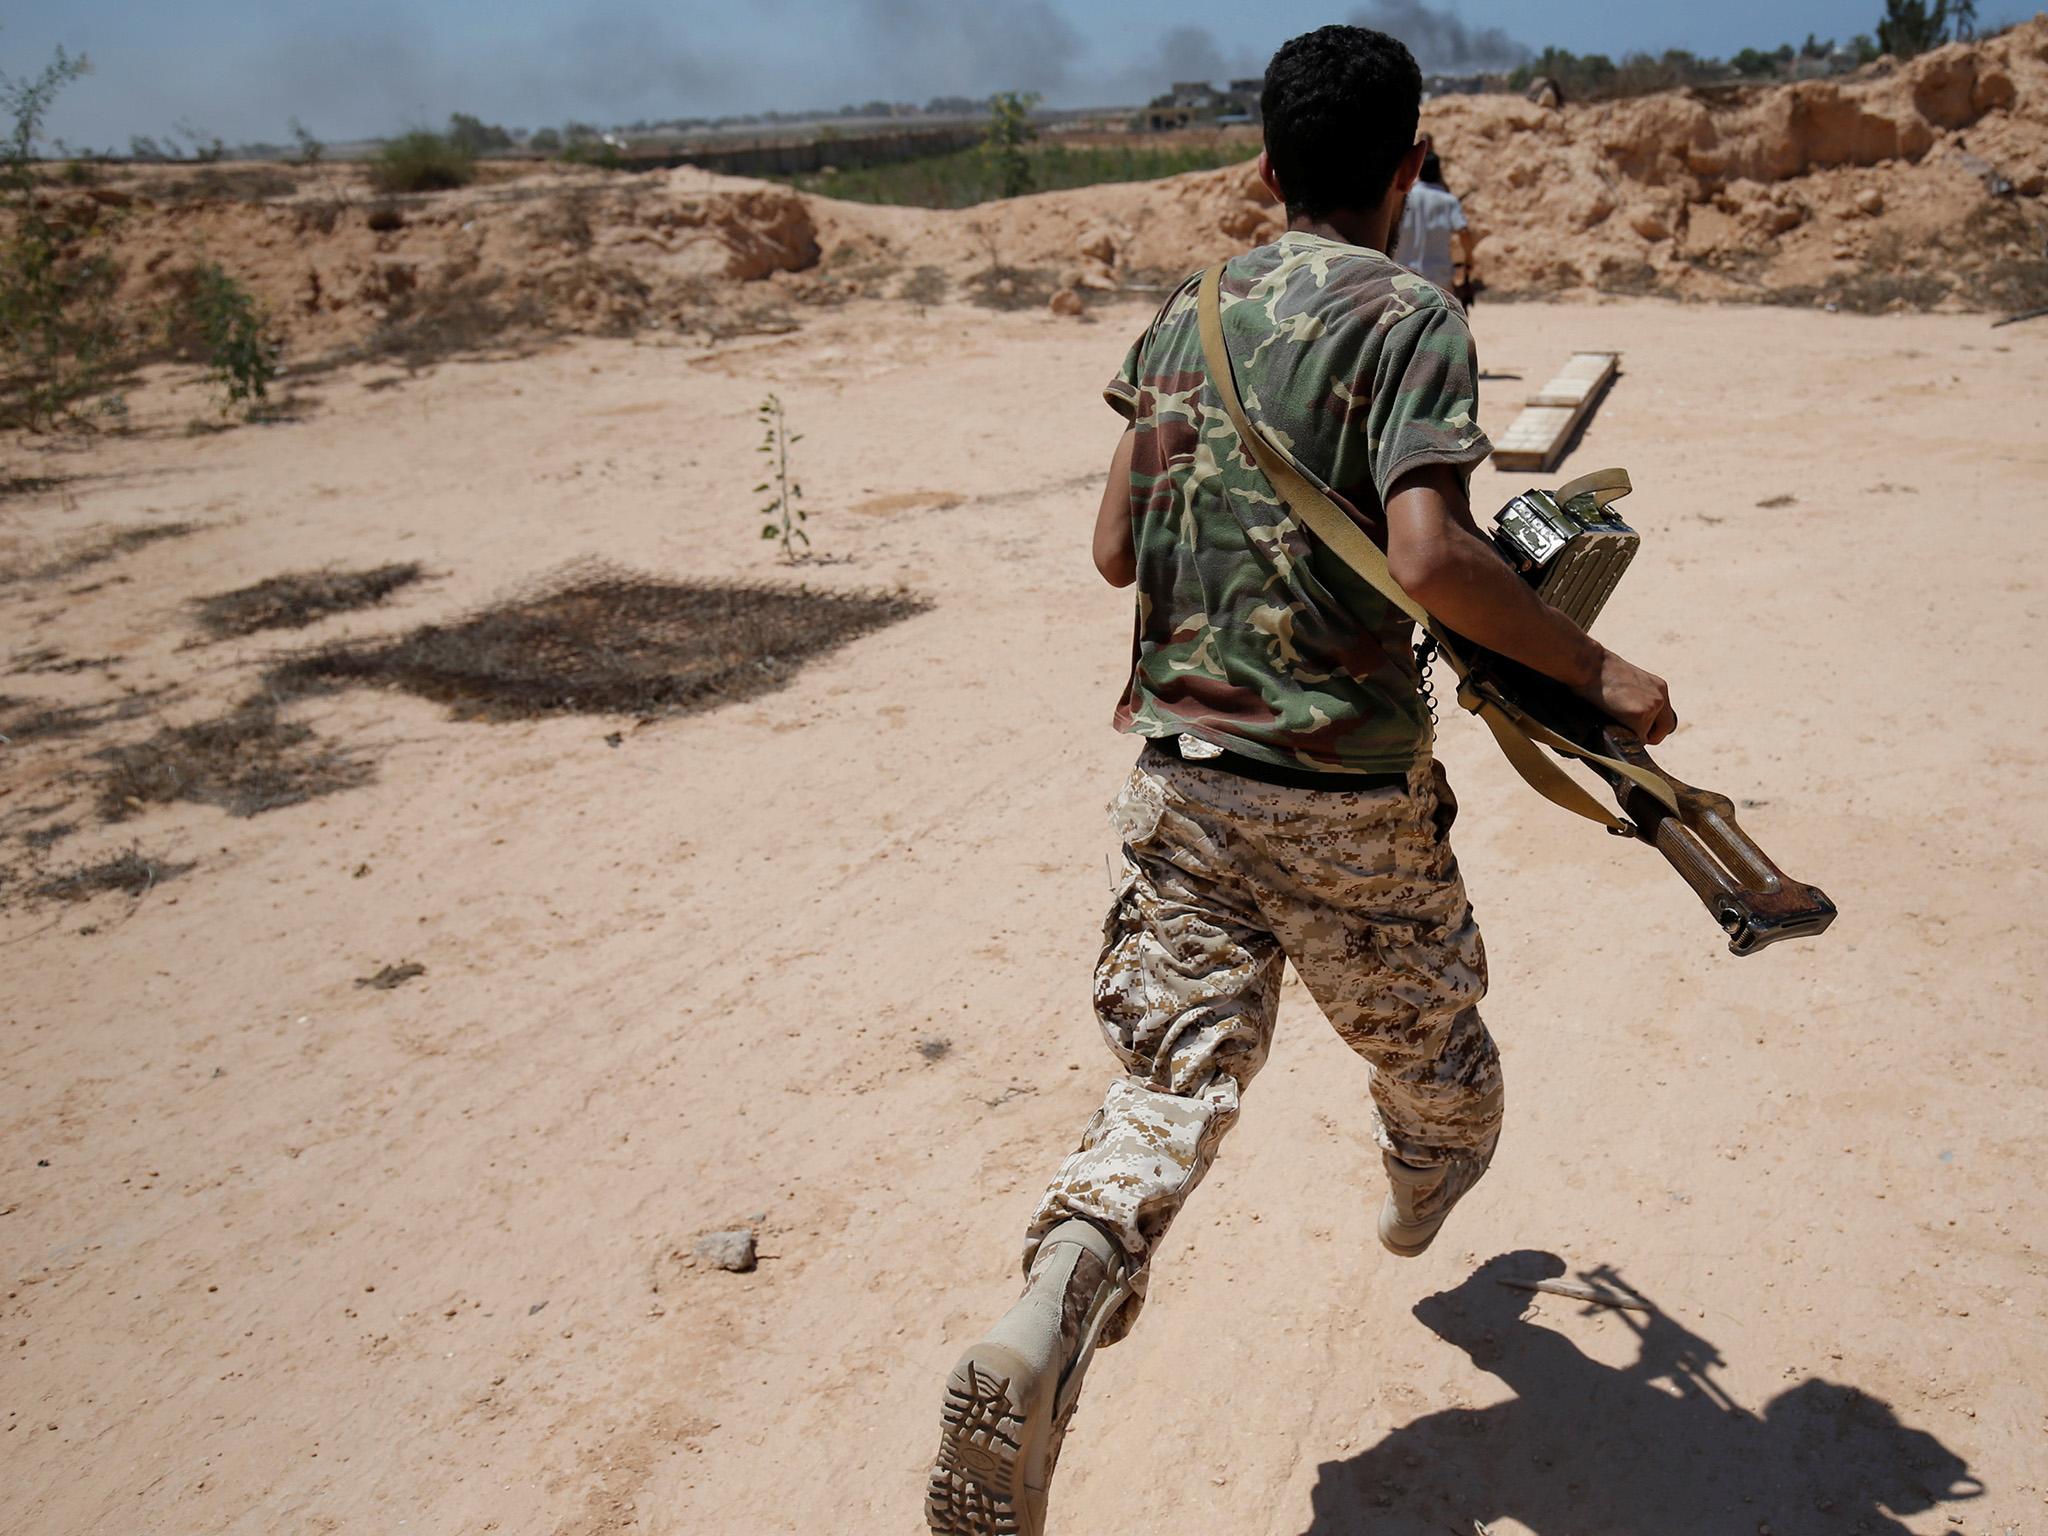 &#13;
A Libyan fighter runs for cover during a battle with Isis fighters in Sirte &#13;